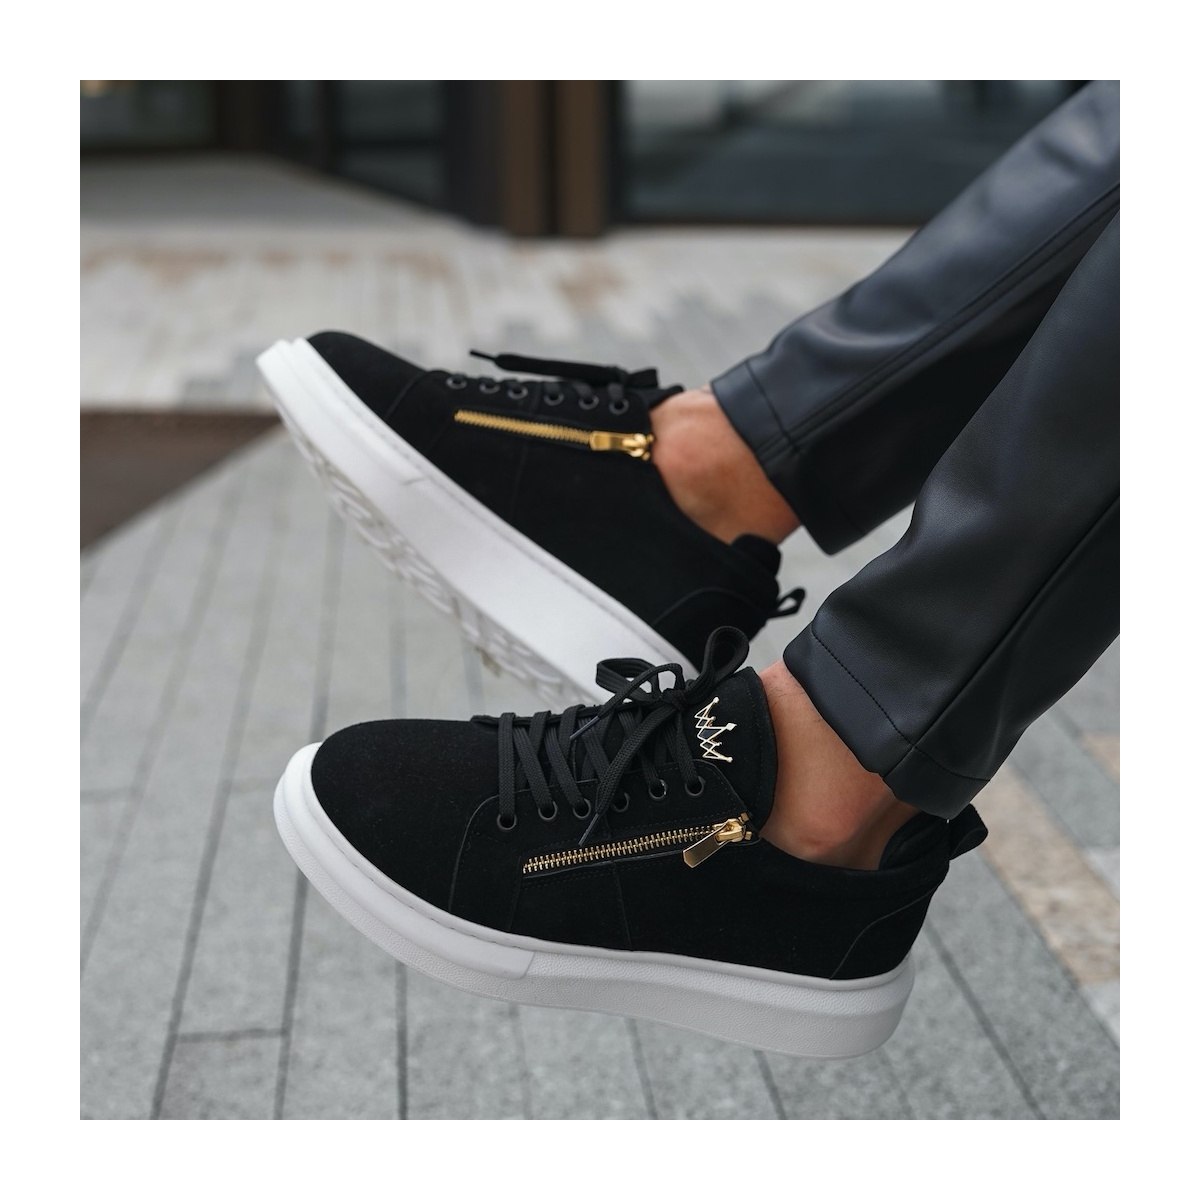 Chunky Suede Sneakers Gold Zipper Designer Shoes Black - 1